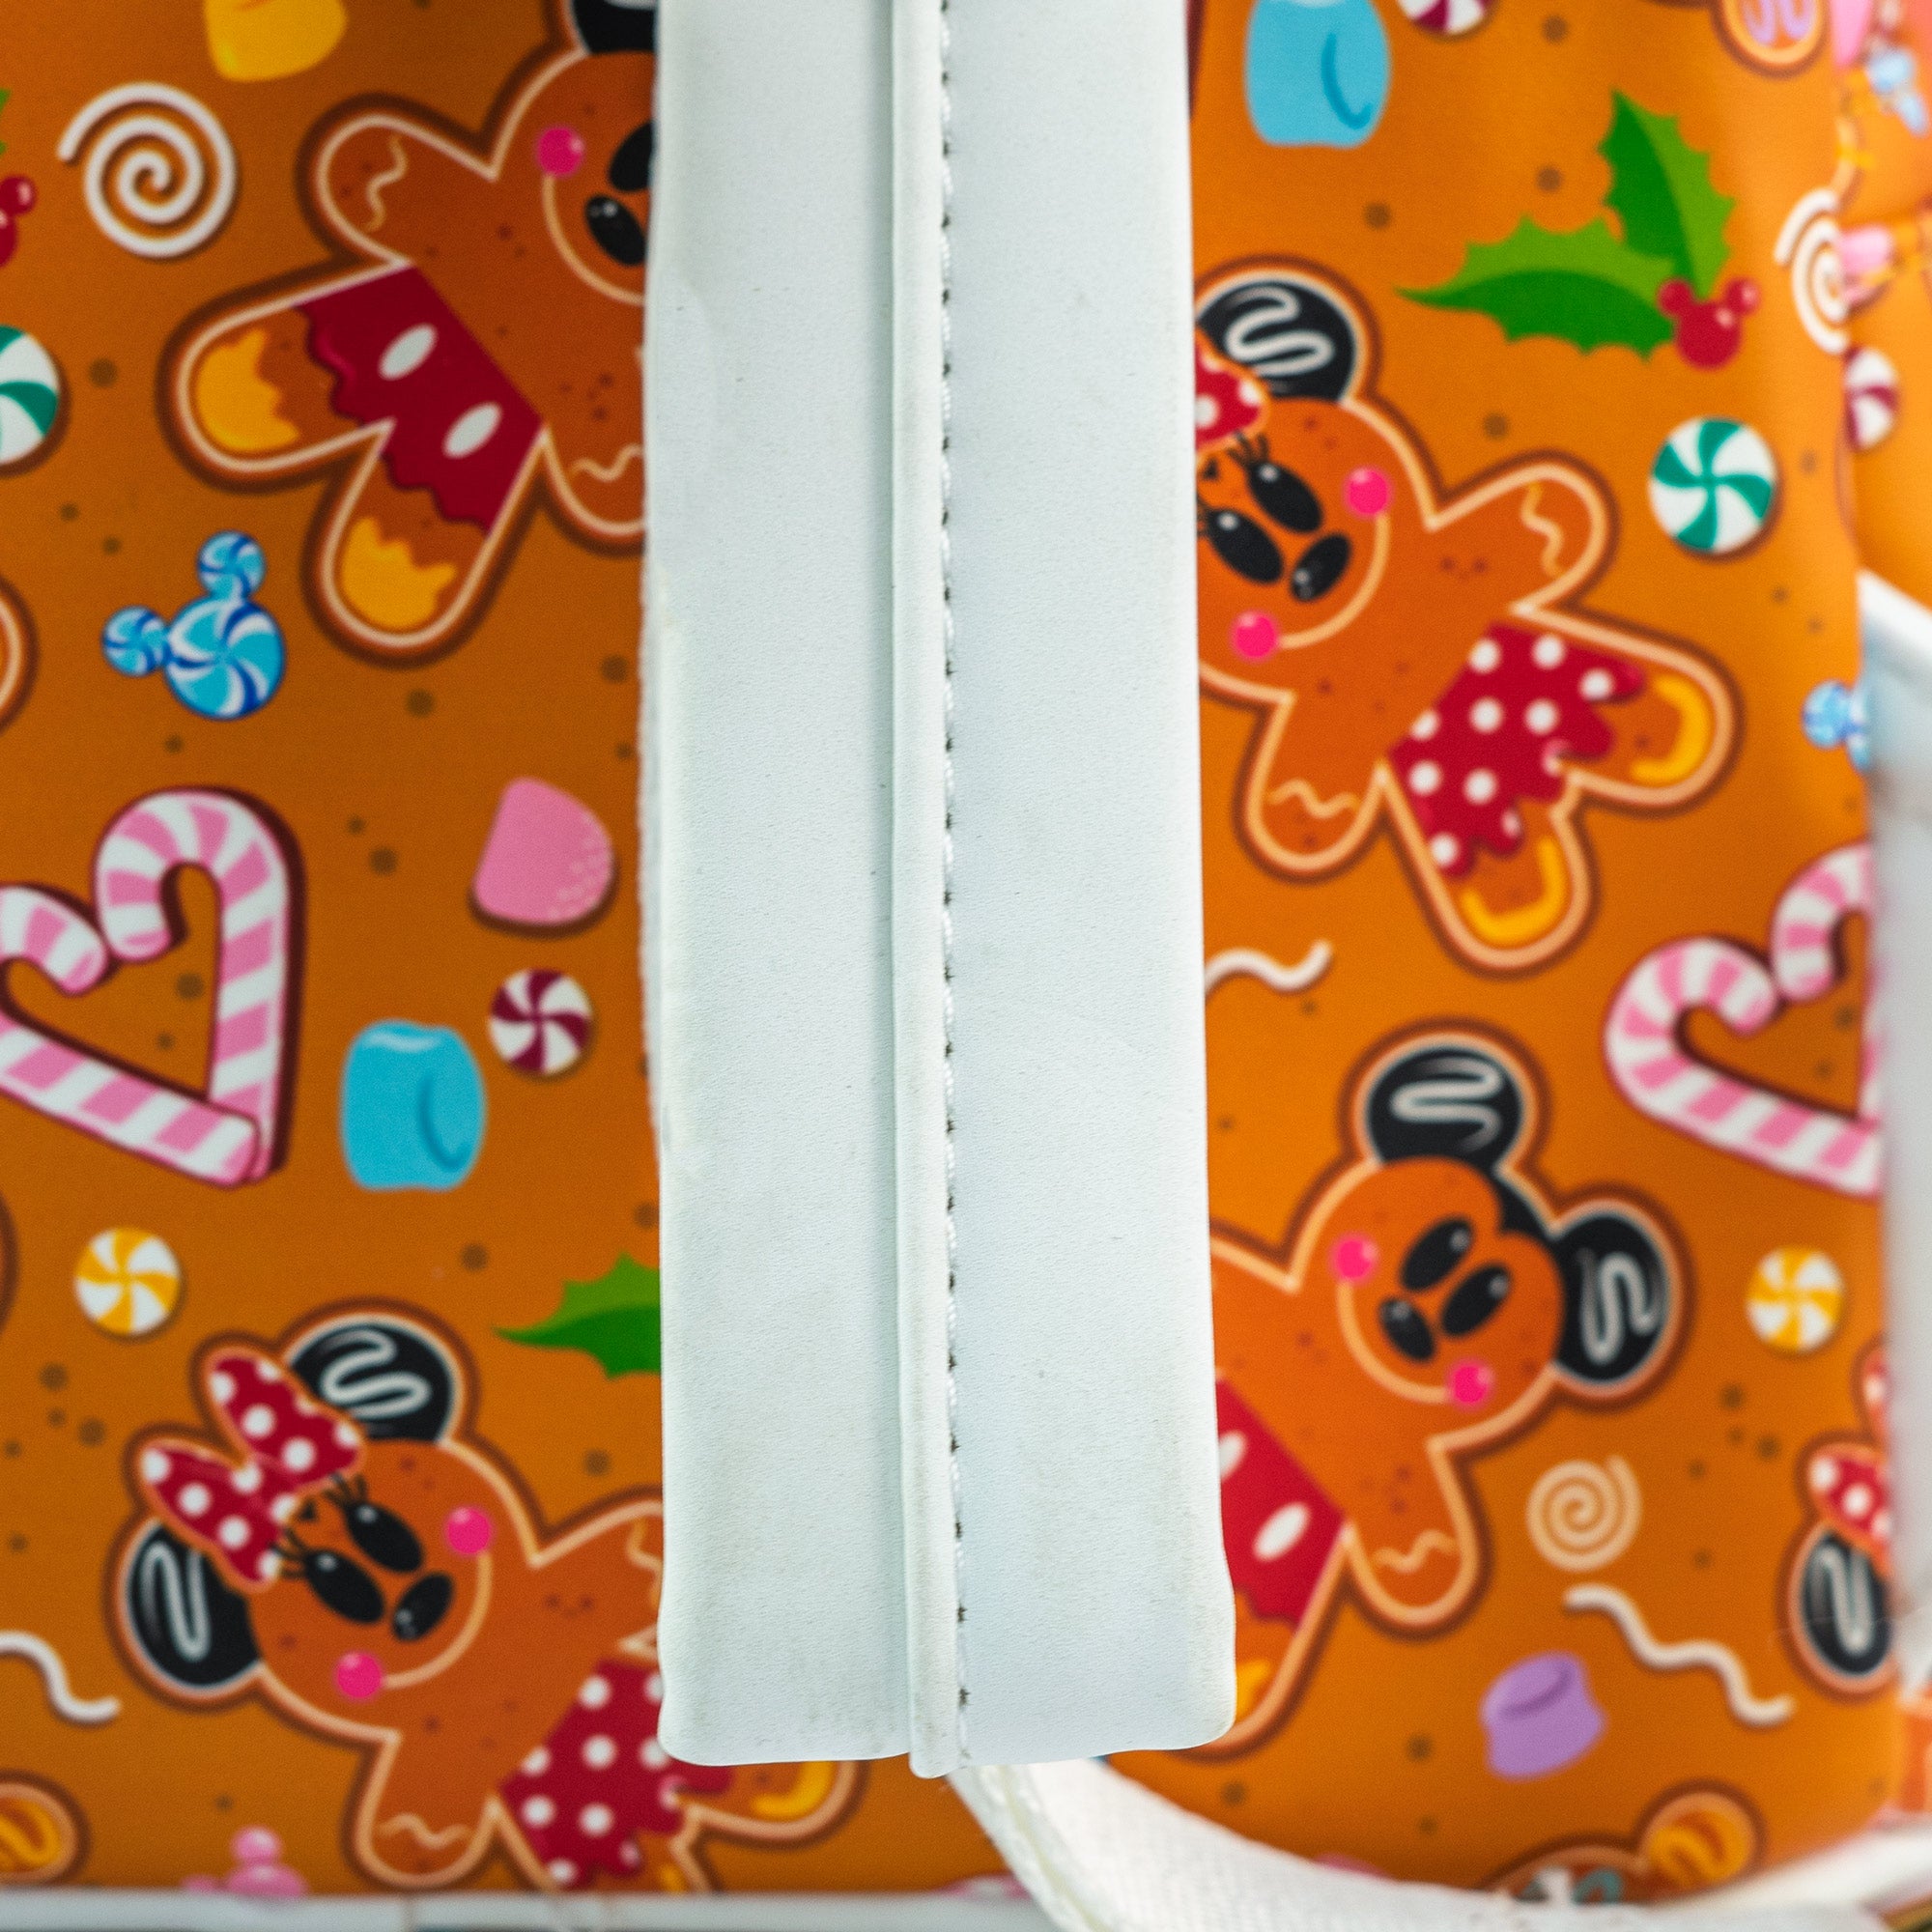 Loungefly x Disney Gingerbread All Over Print Mini Backpack and Headband Set